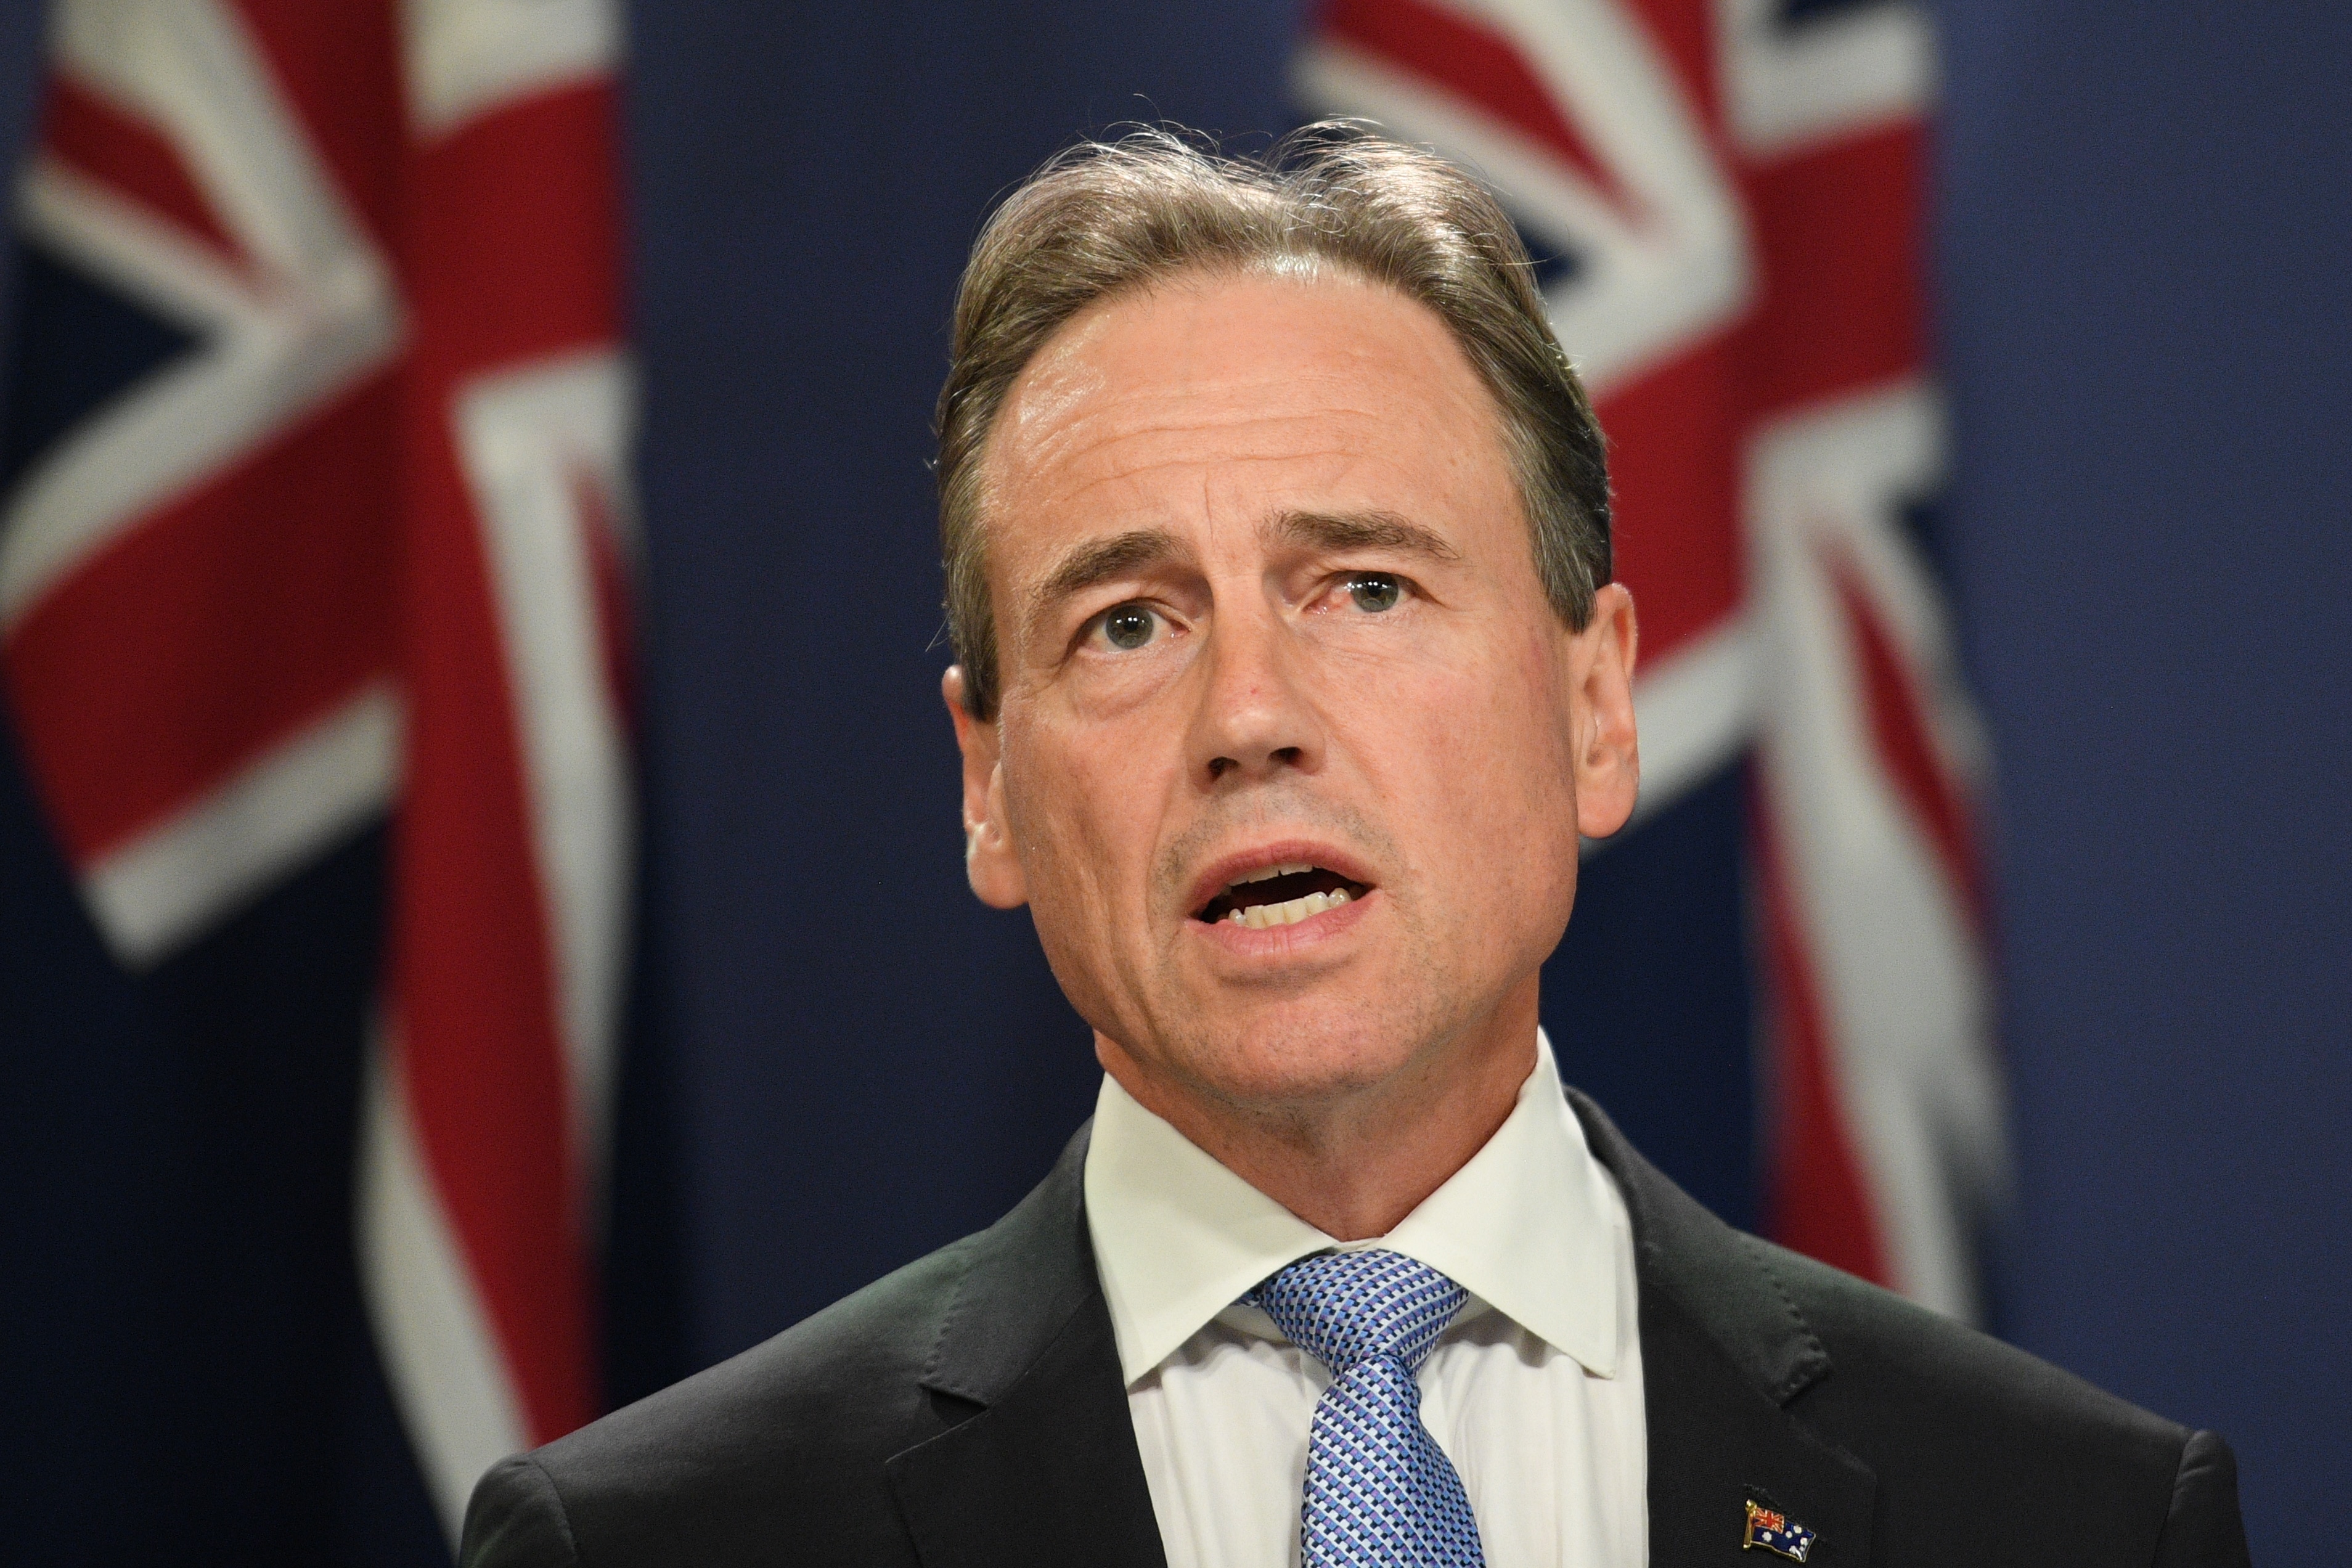 Federal Minister for Health Greg Hunt delivers an update on the COVID-19 vaccination program.